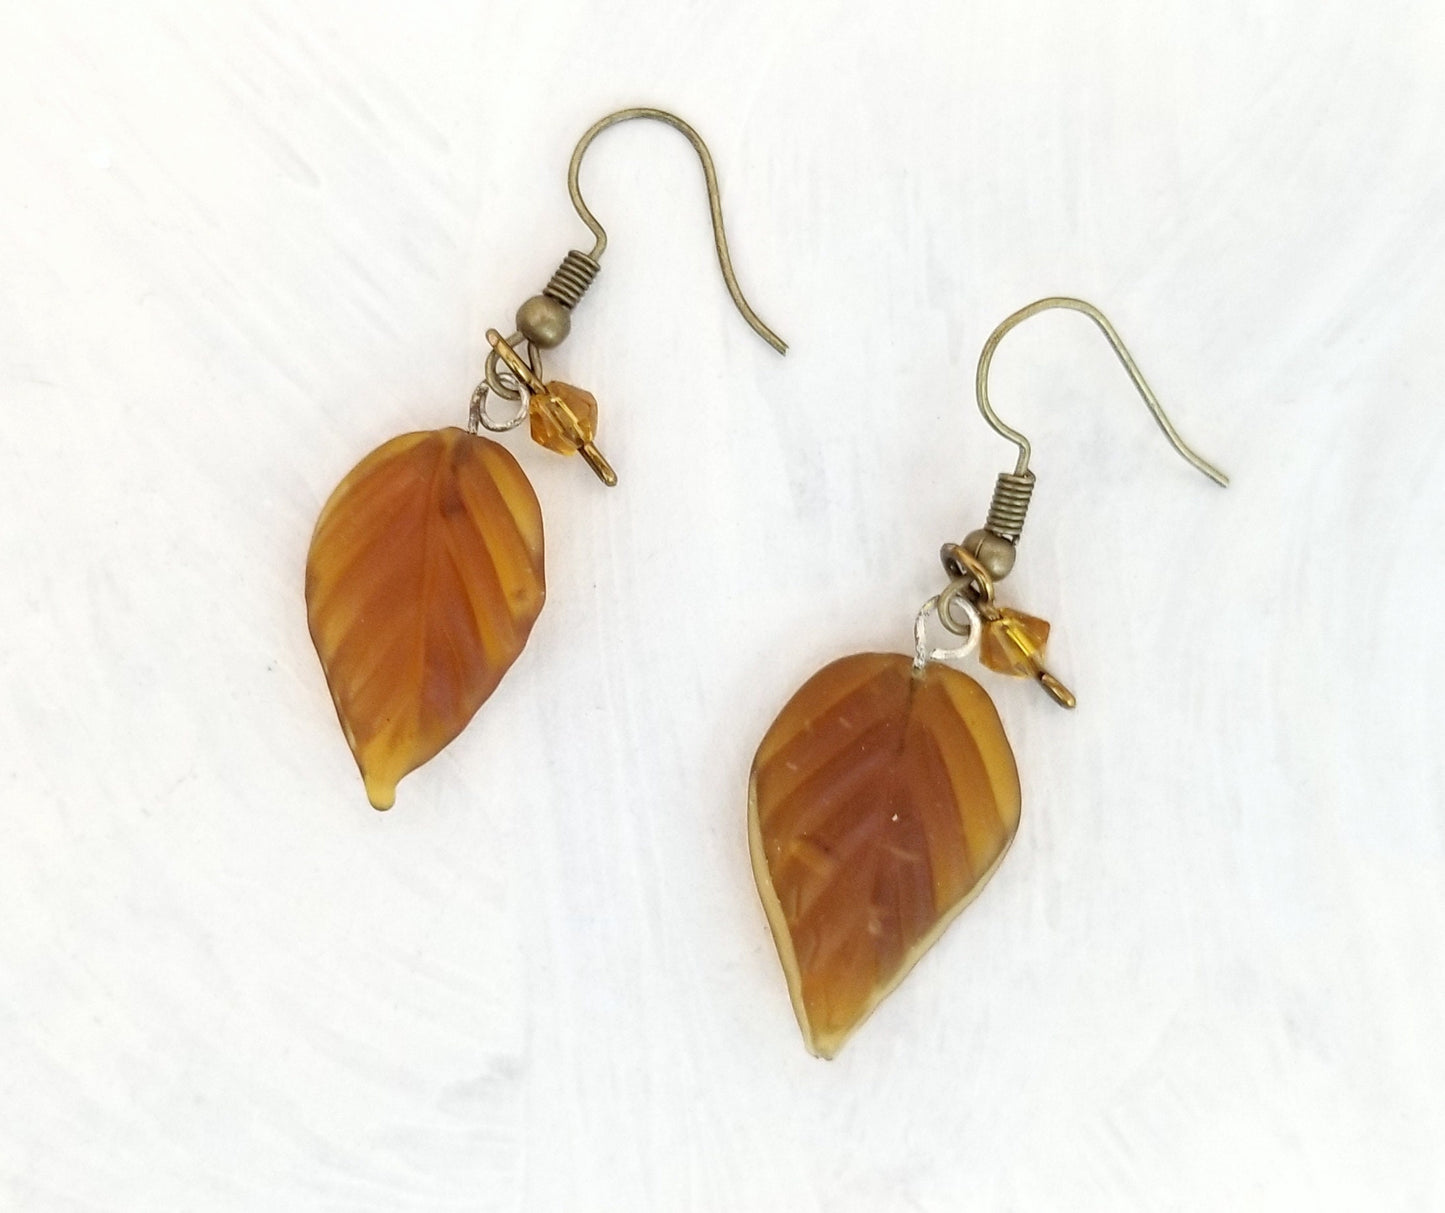 Long Glass Leaf Earrings in Frosted Brown, Wedding, Bridesmaid, Art Nouveau, Belle Époque, Renaissance, Forest, Choice of Closure Types